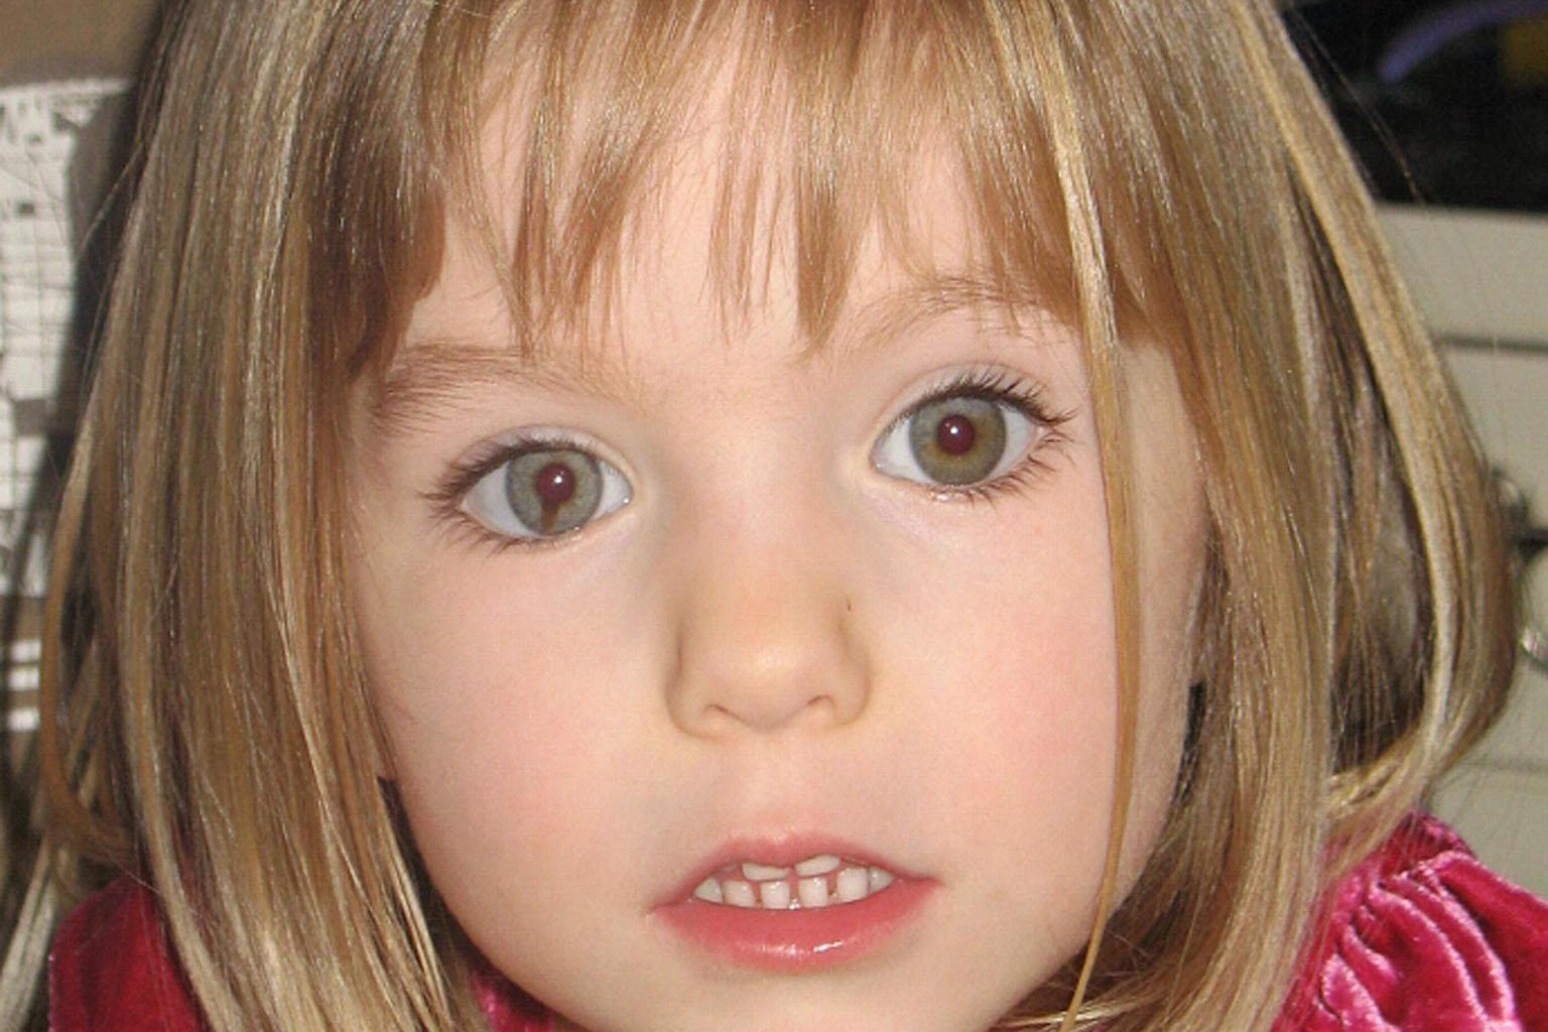 Madeleine McCann’s parents issue statement 16 years after her disappearance 